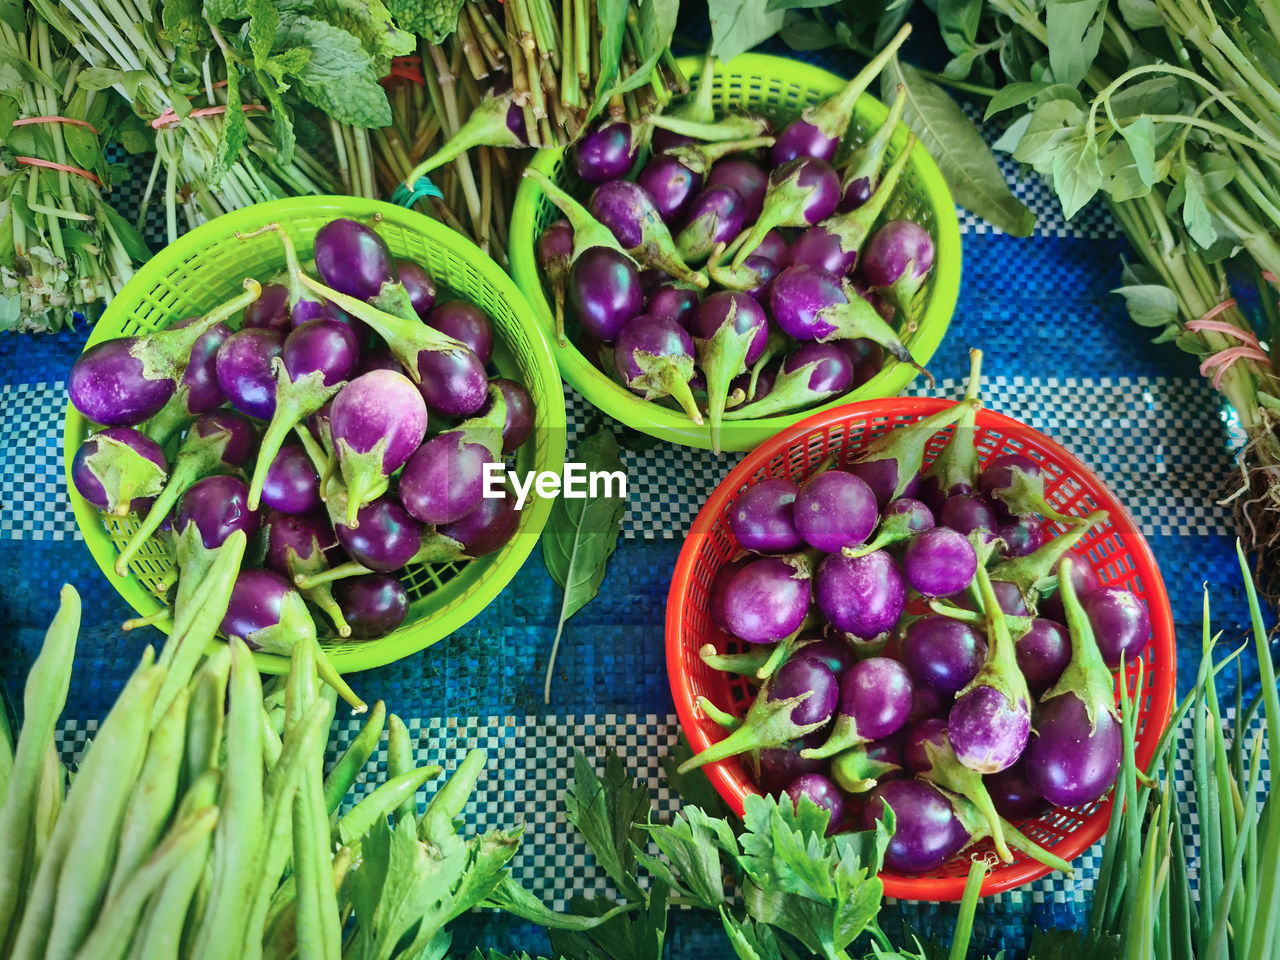 HIGH ANGLE VIEW OF VARIOUS VEGETABLES IN BASKET